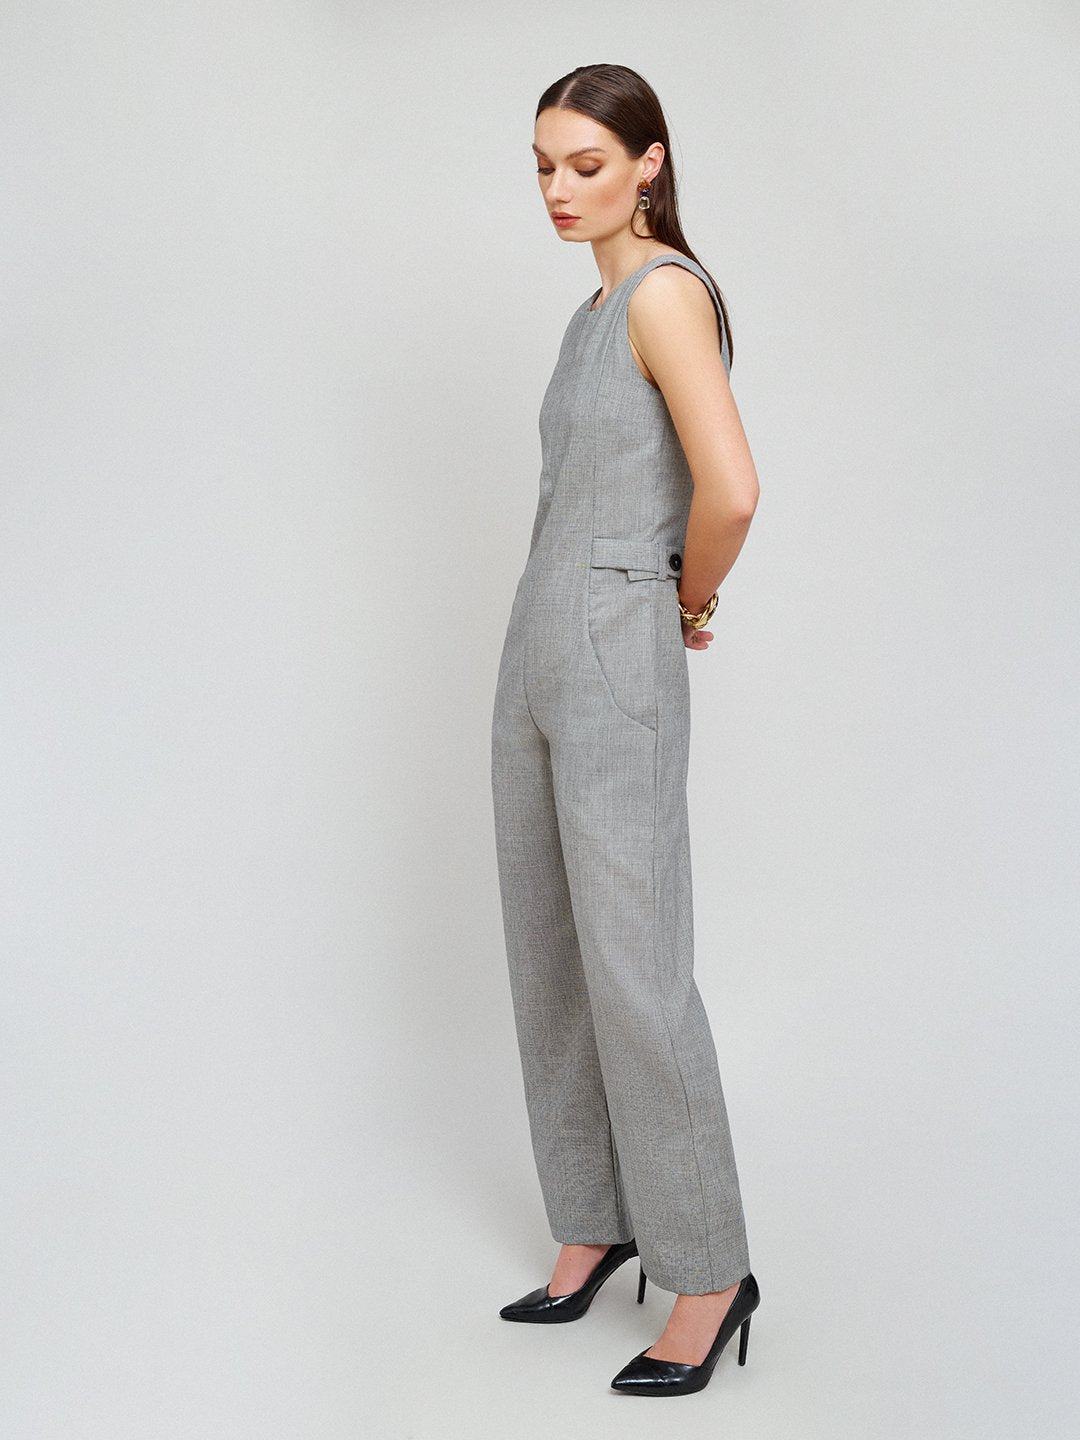 The Chic Jumpsuit - AMILLI at LabelRow